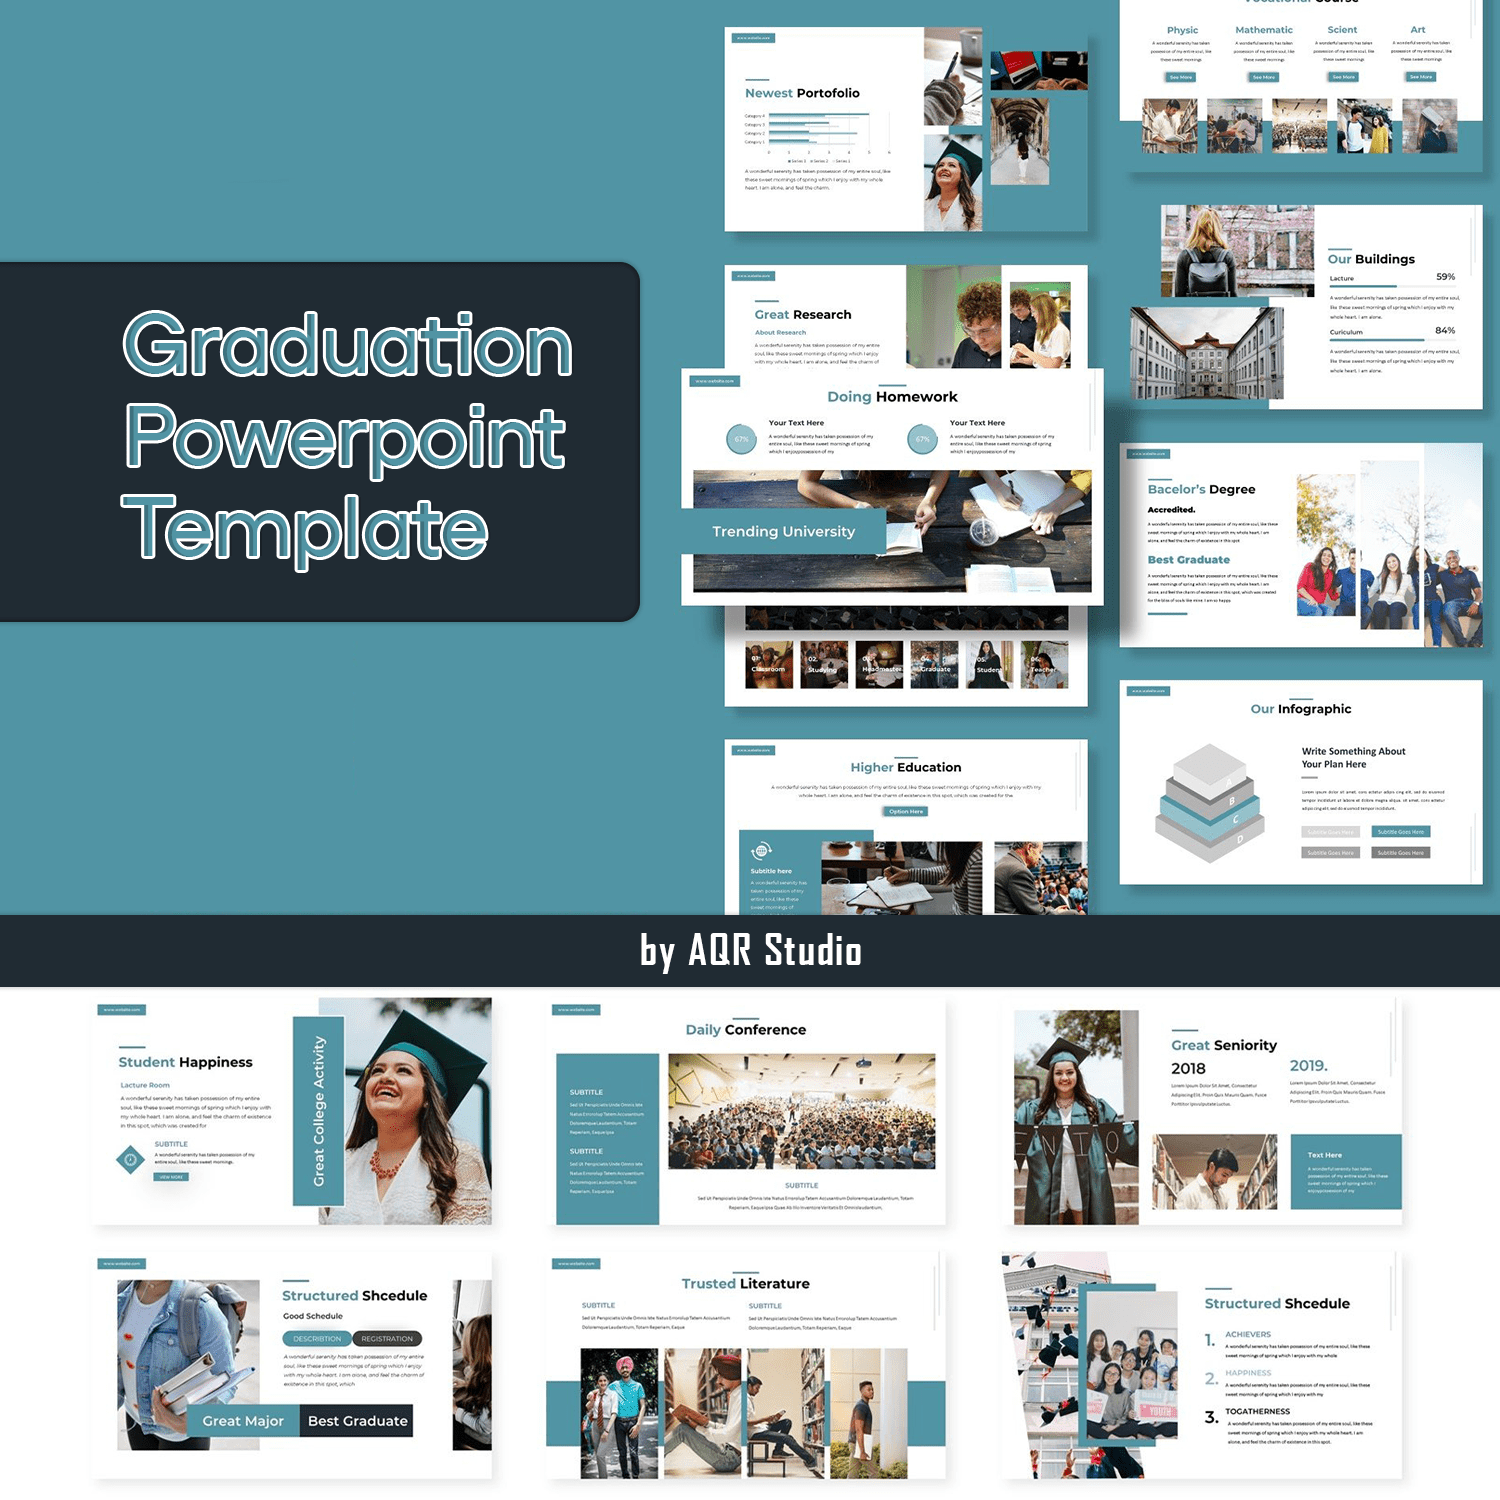 Graduation - PowerPoint Template cover image.